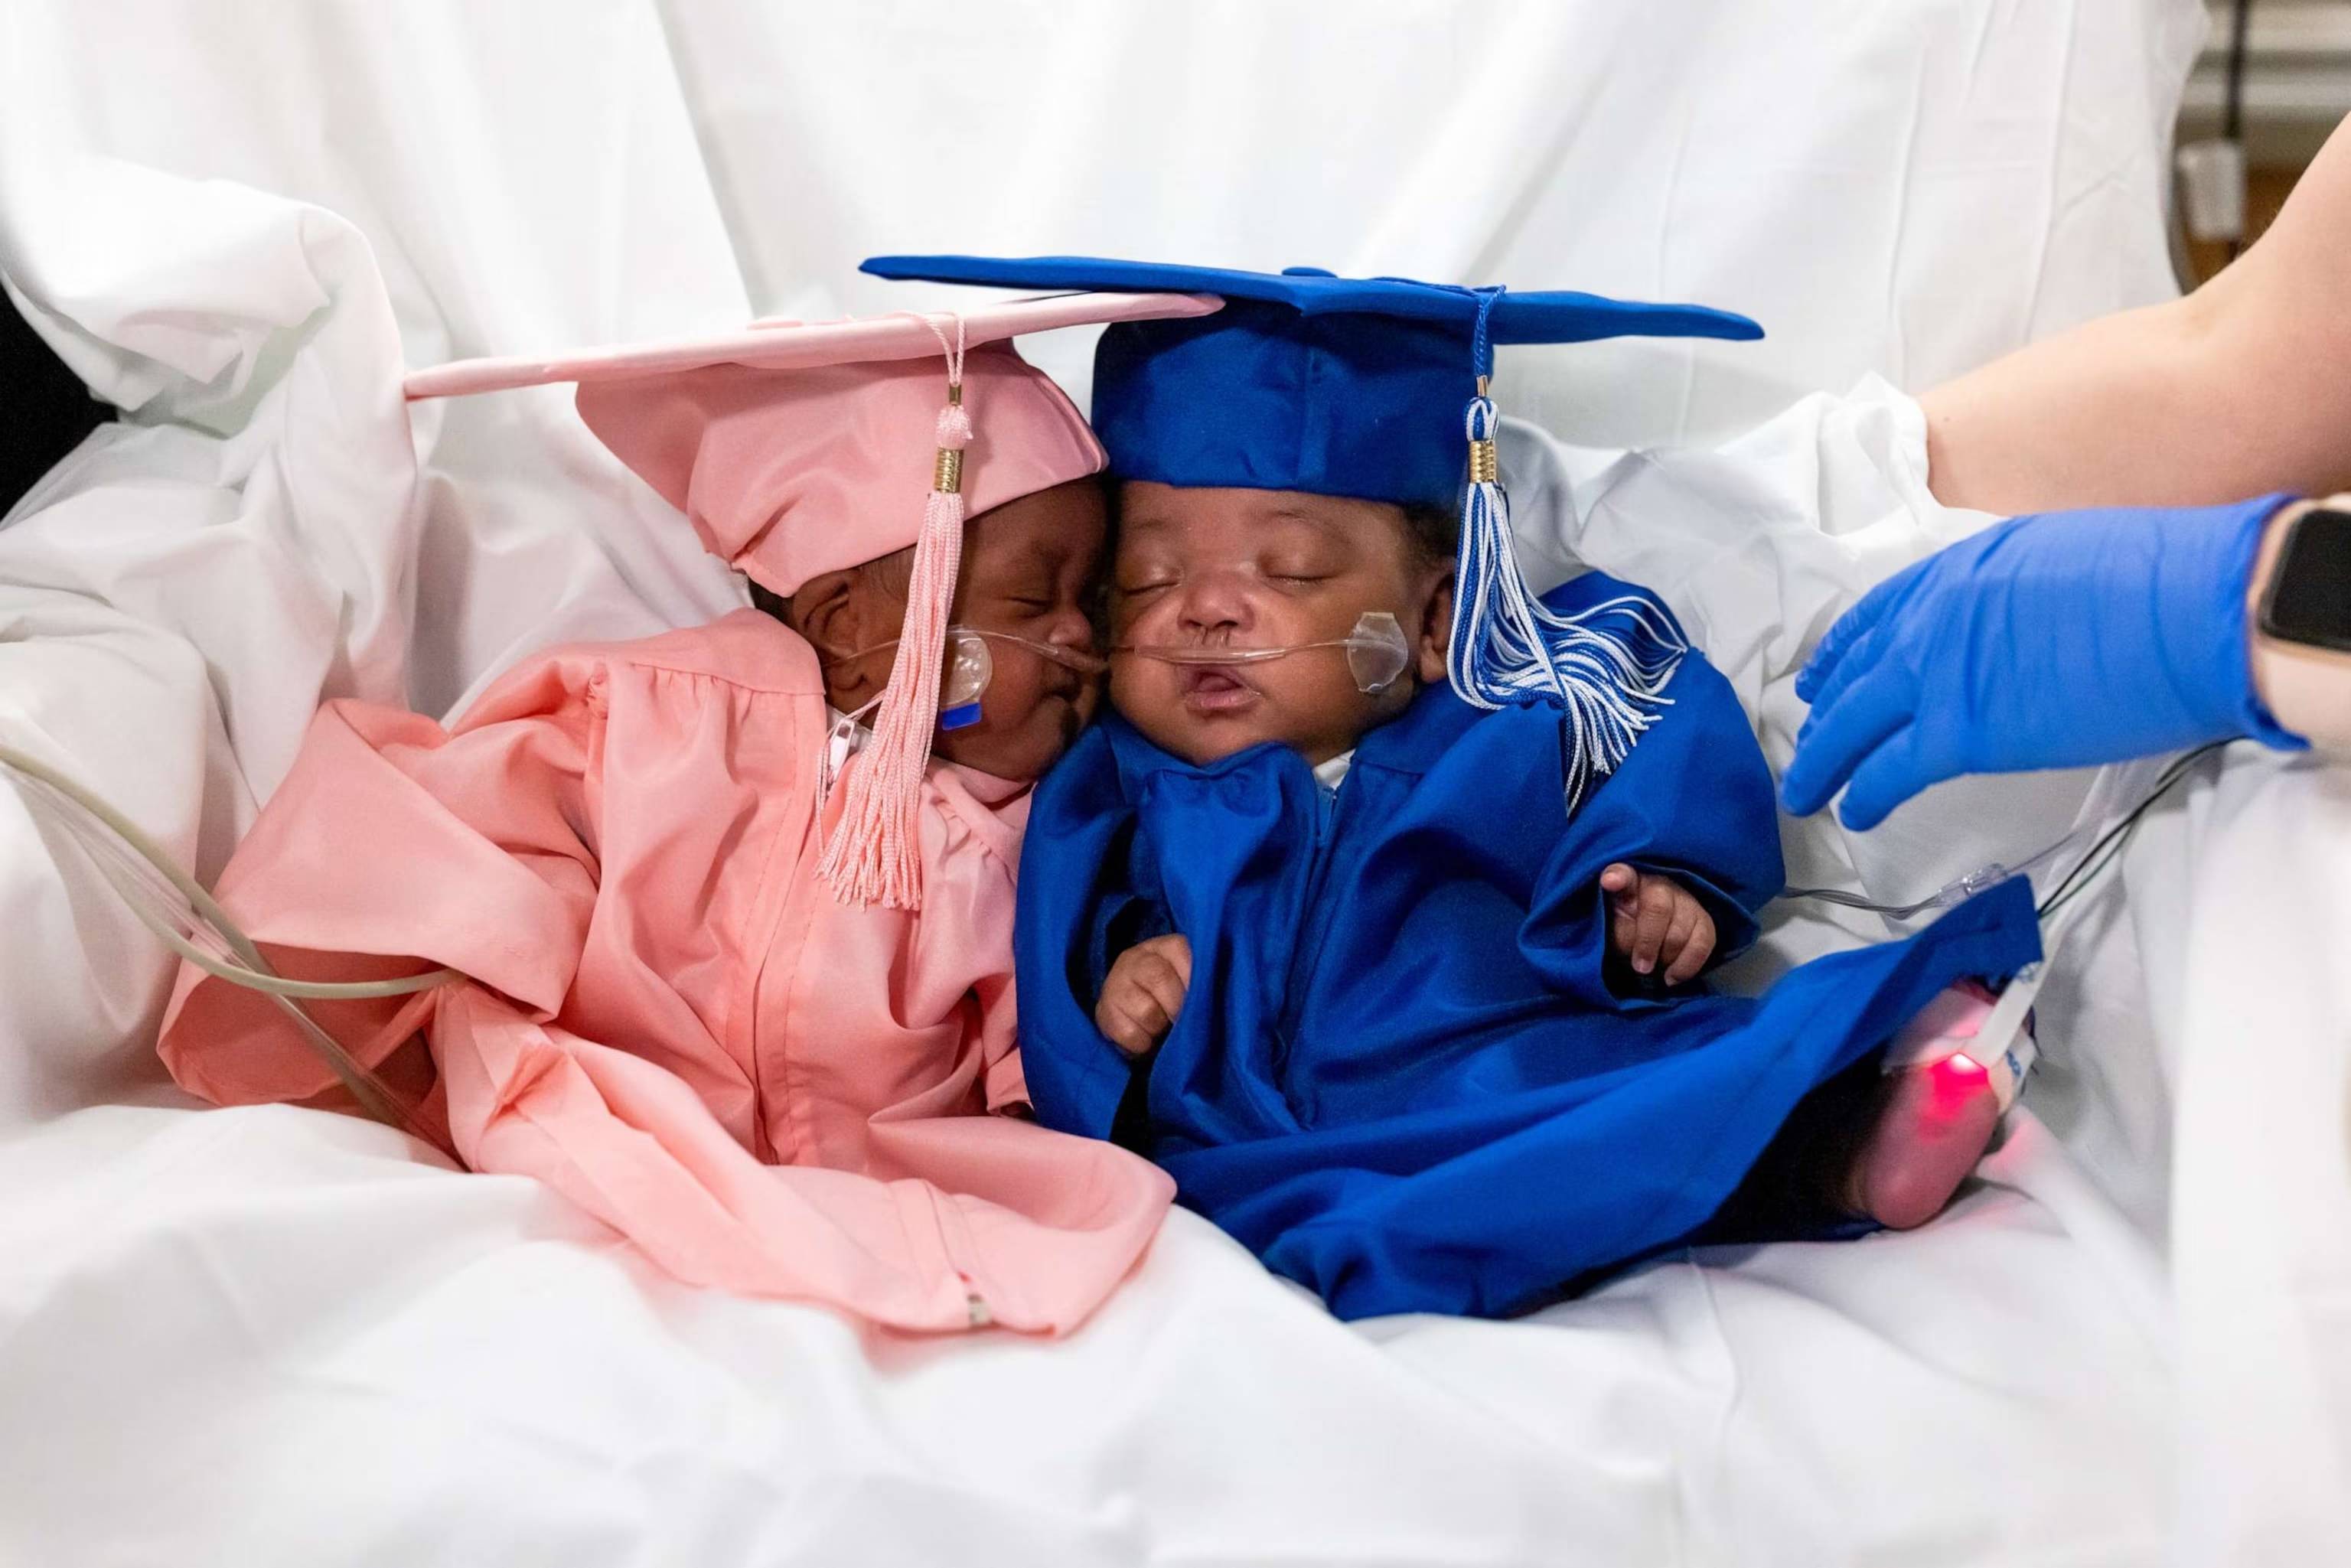 Twins Kimyah and DJ were able to go home after 138 days in the neonatal intensive care unit.